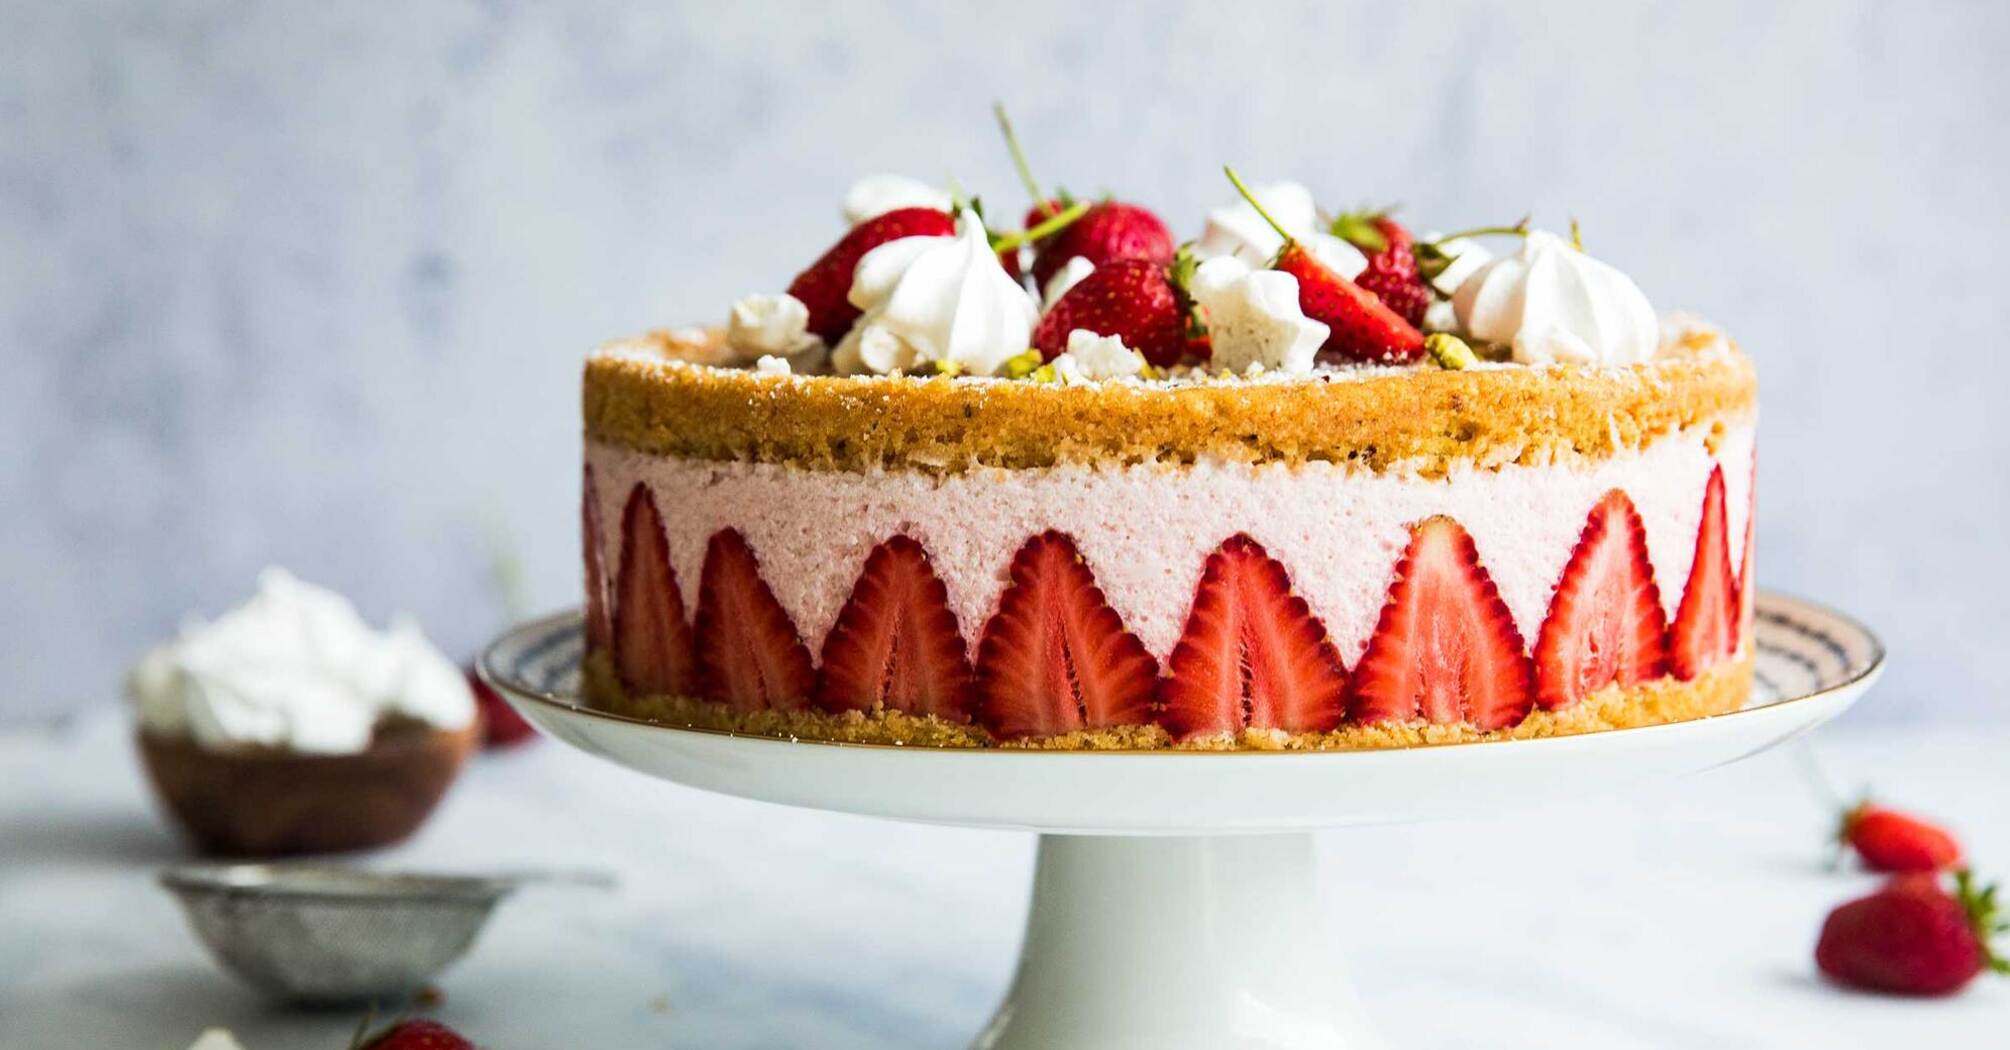 Be sure to make this summer cake for your family: sponge cakes and delicate strawberry mousse